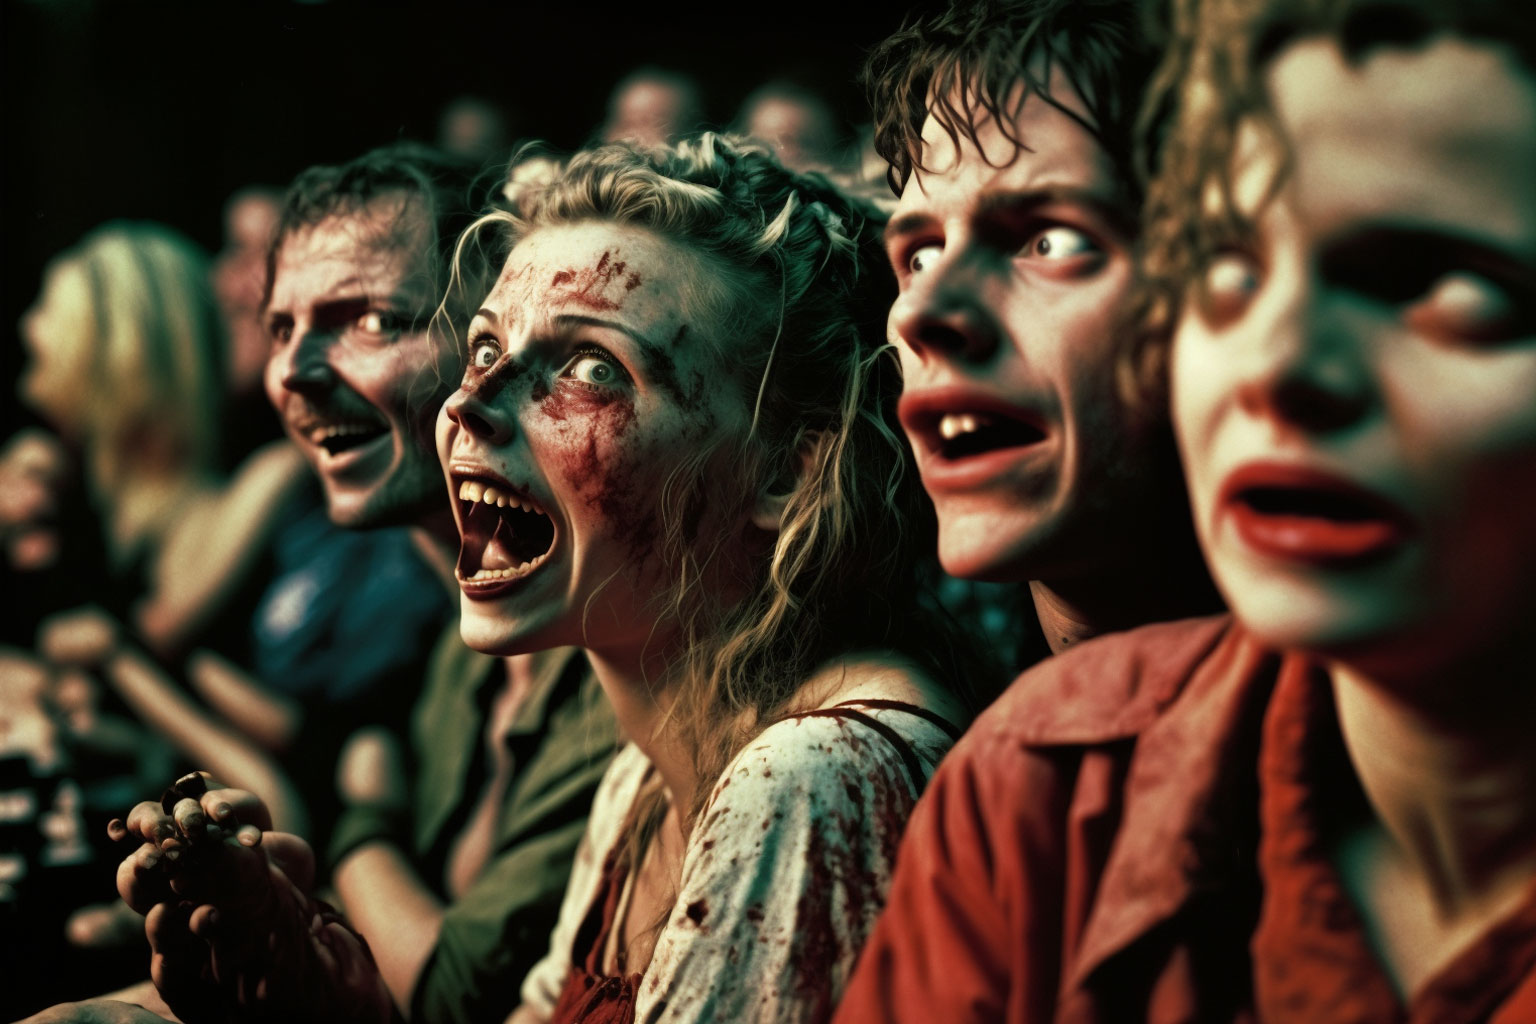 17-Bastopia_Chainsaw-audience-close-up-1